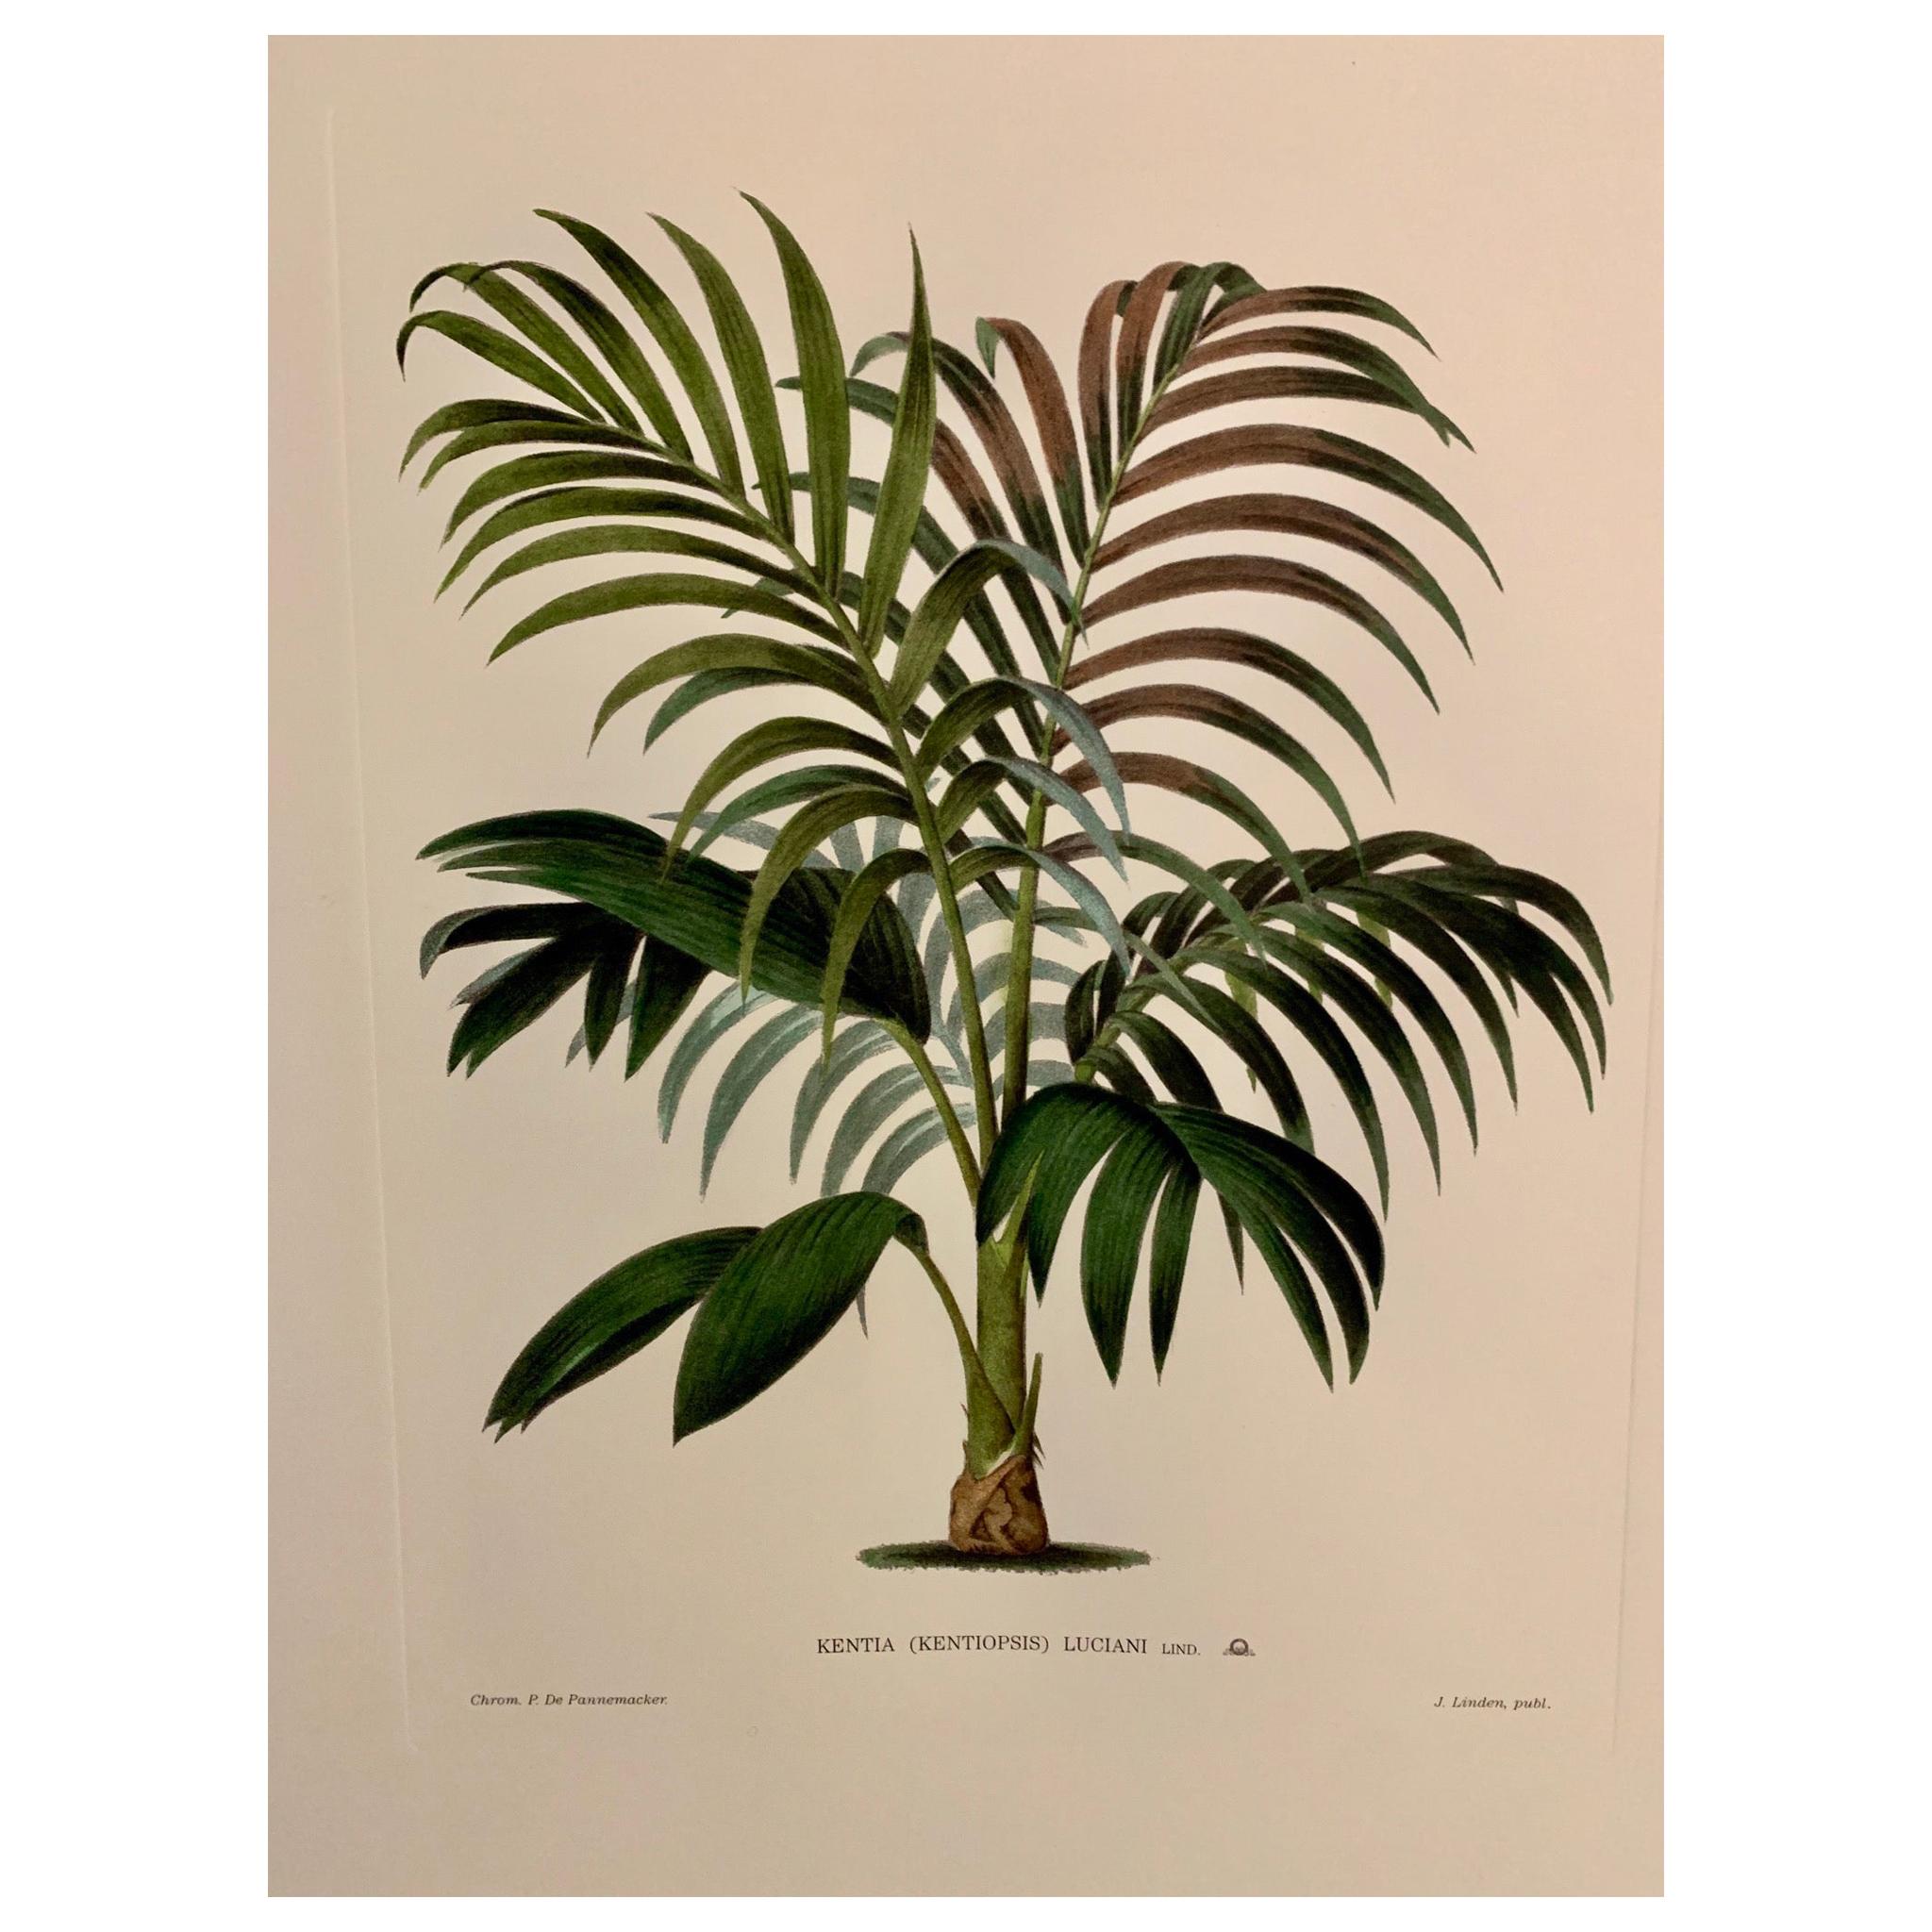 Italian Contemporary Hand Painted Botanical Print "Kentia Luciani" 1 of 6 For Sale